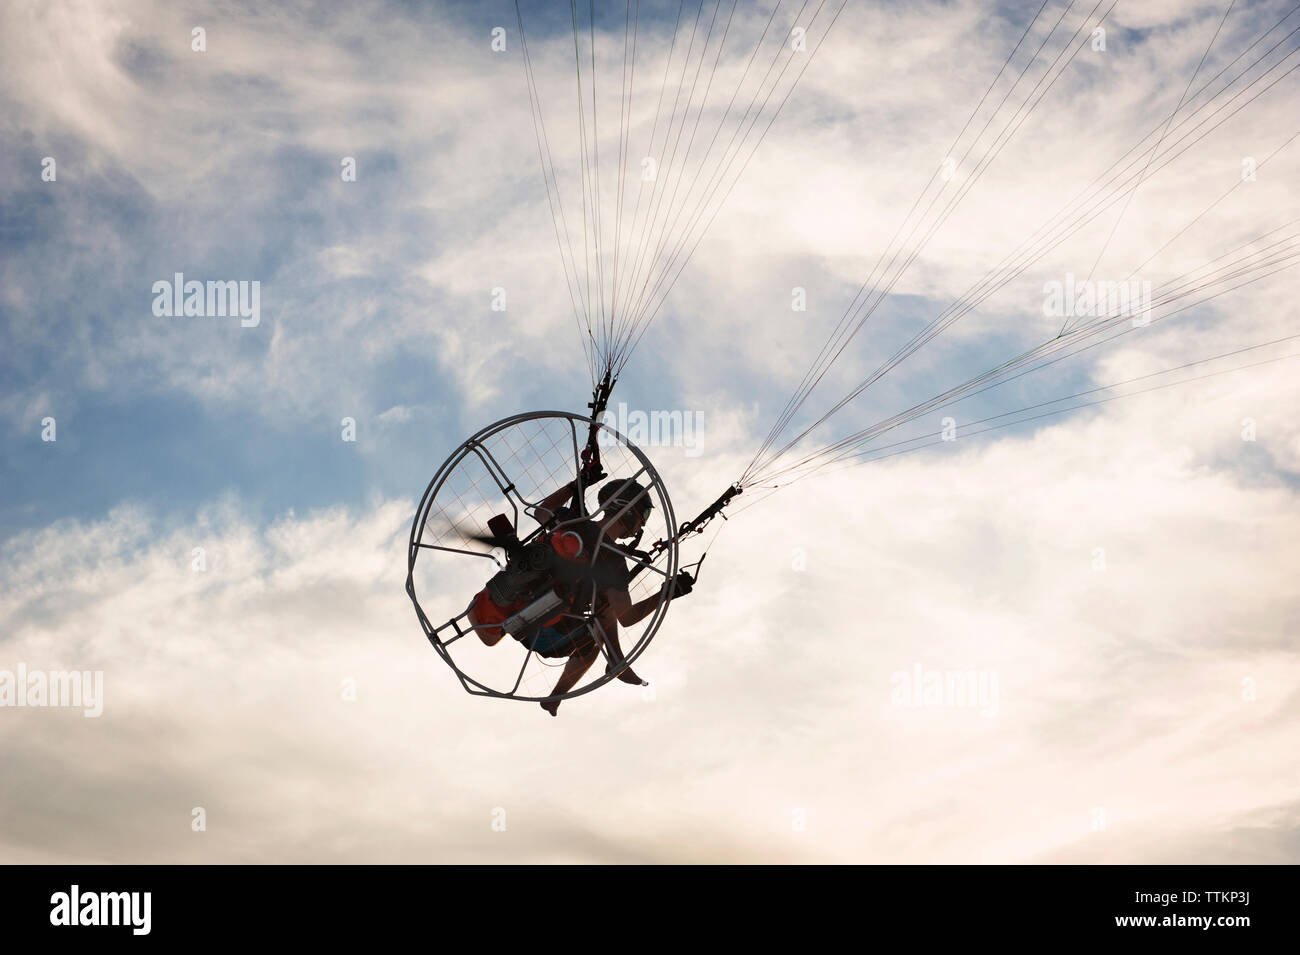 Low angle view of man paragliding against cloudy sky Stock Photo